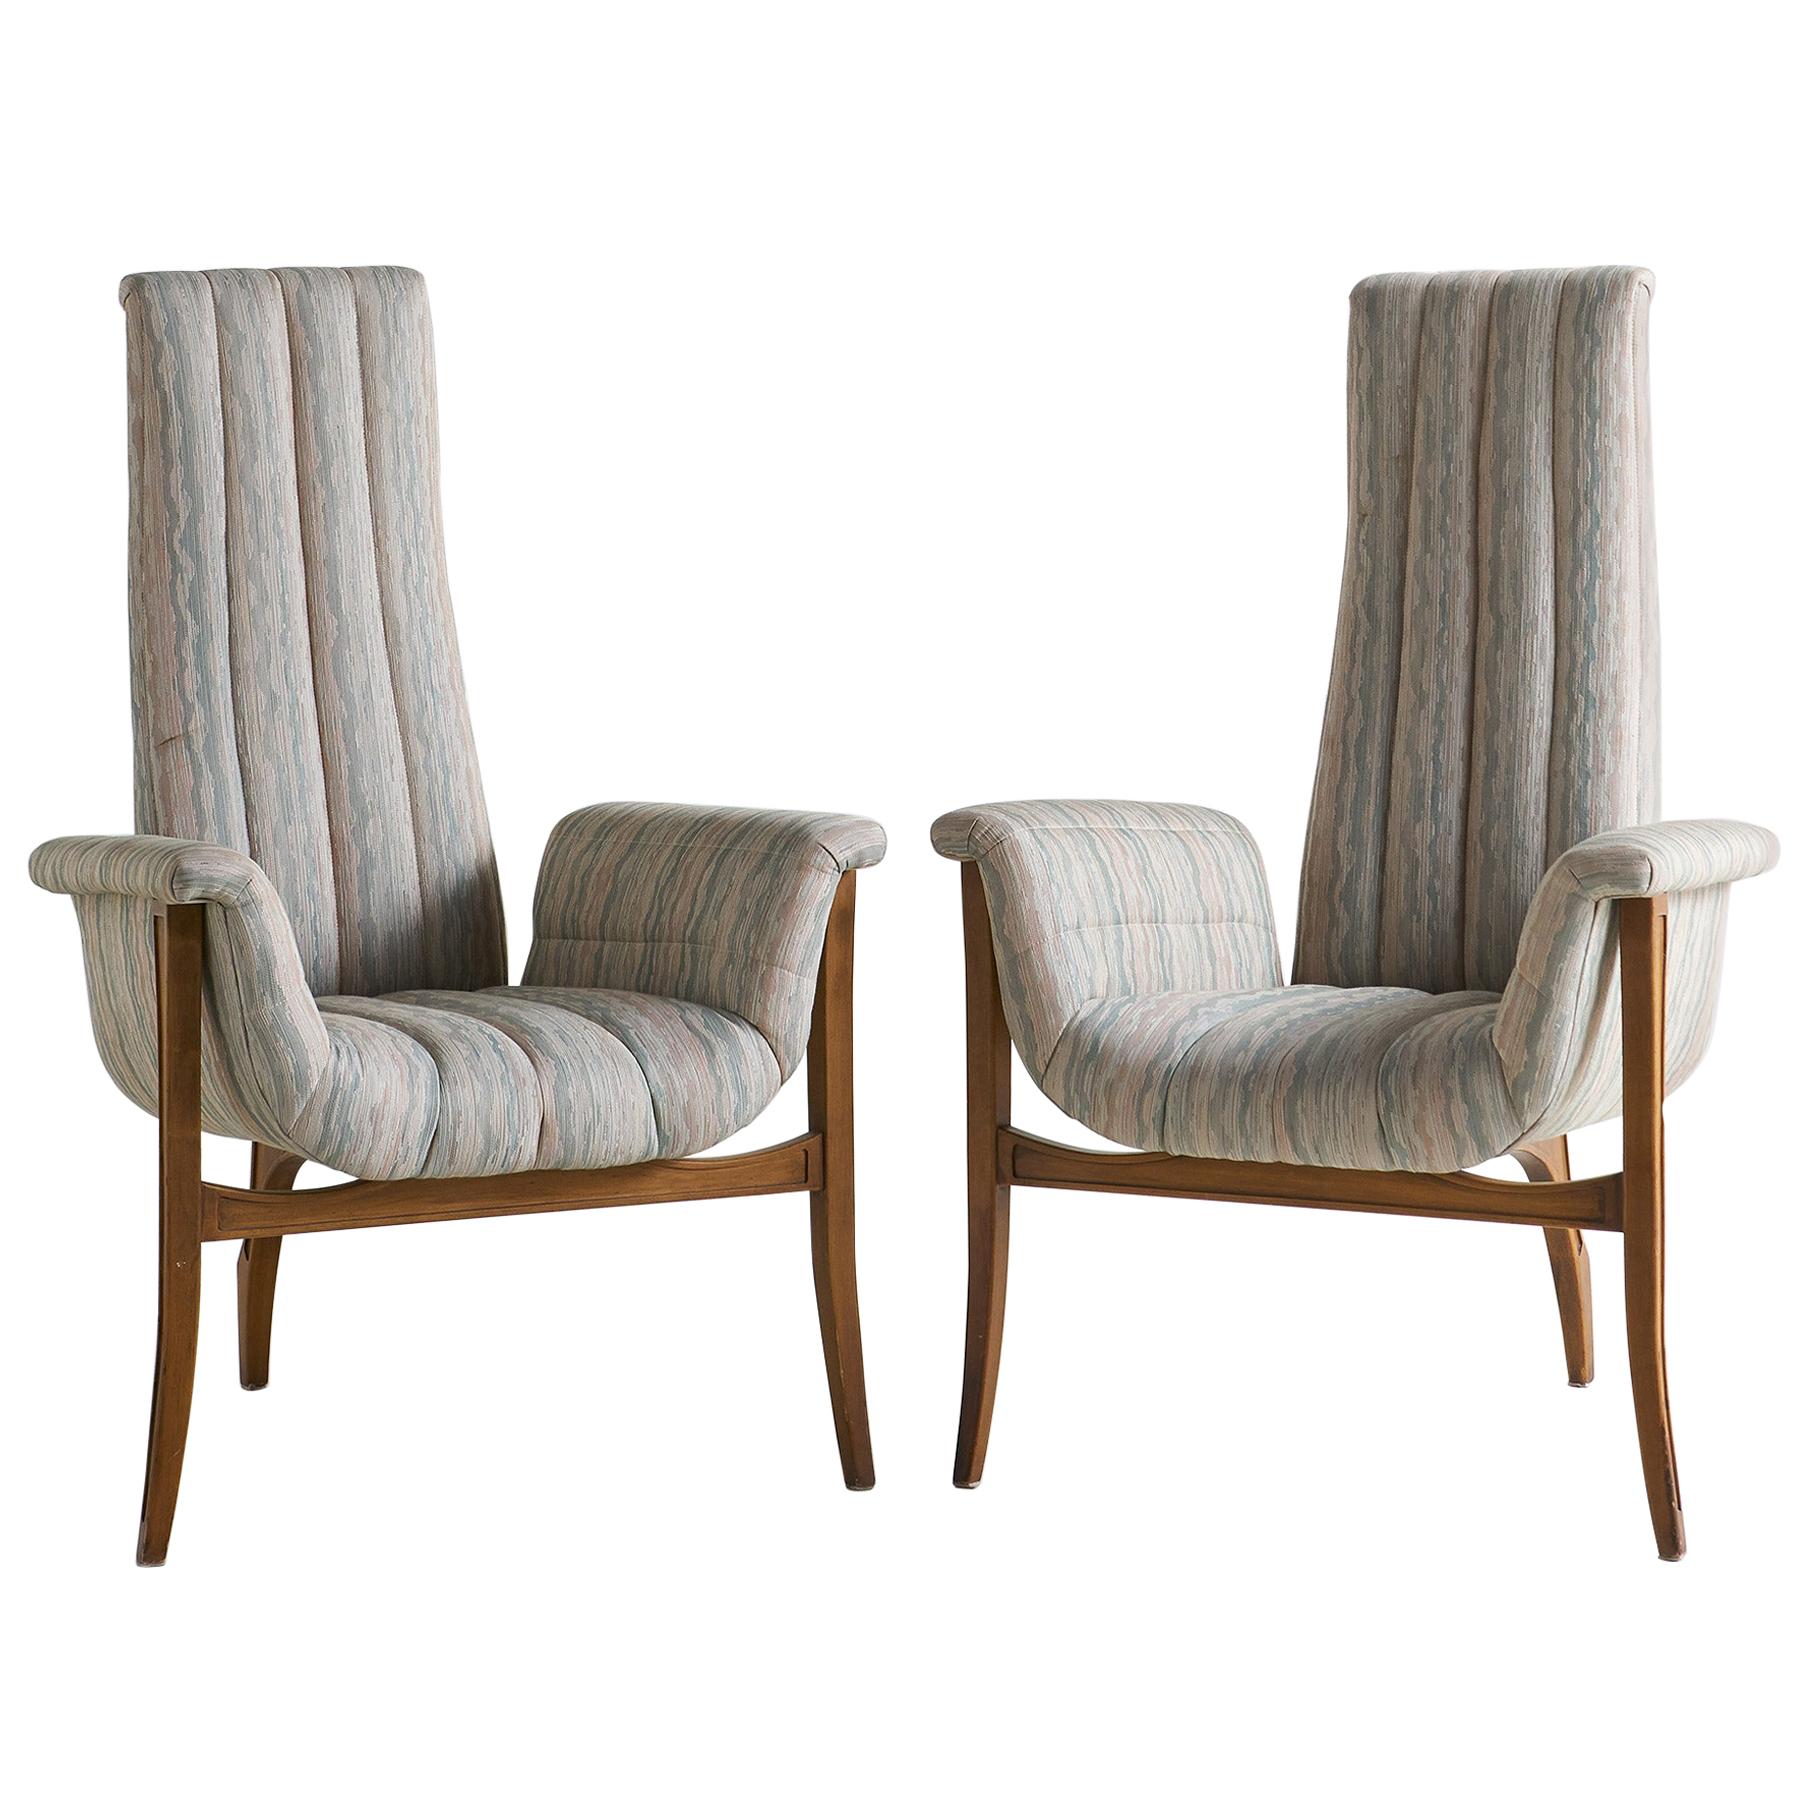 Pair of Midcentury High Backed Tri Legged Chair